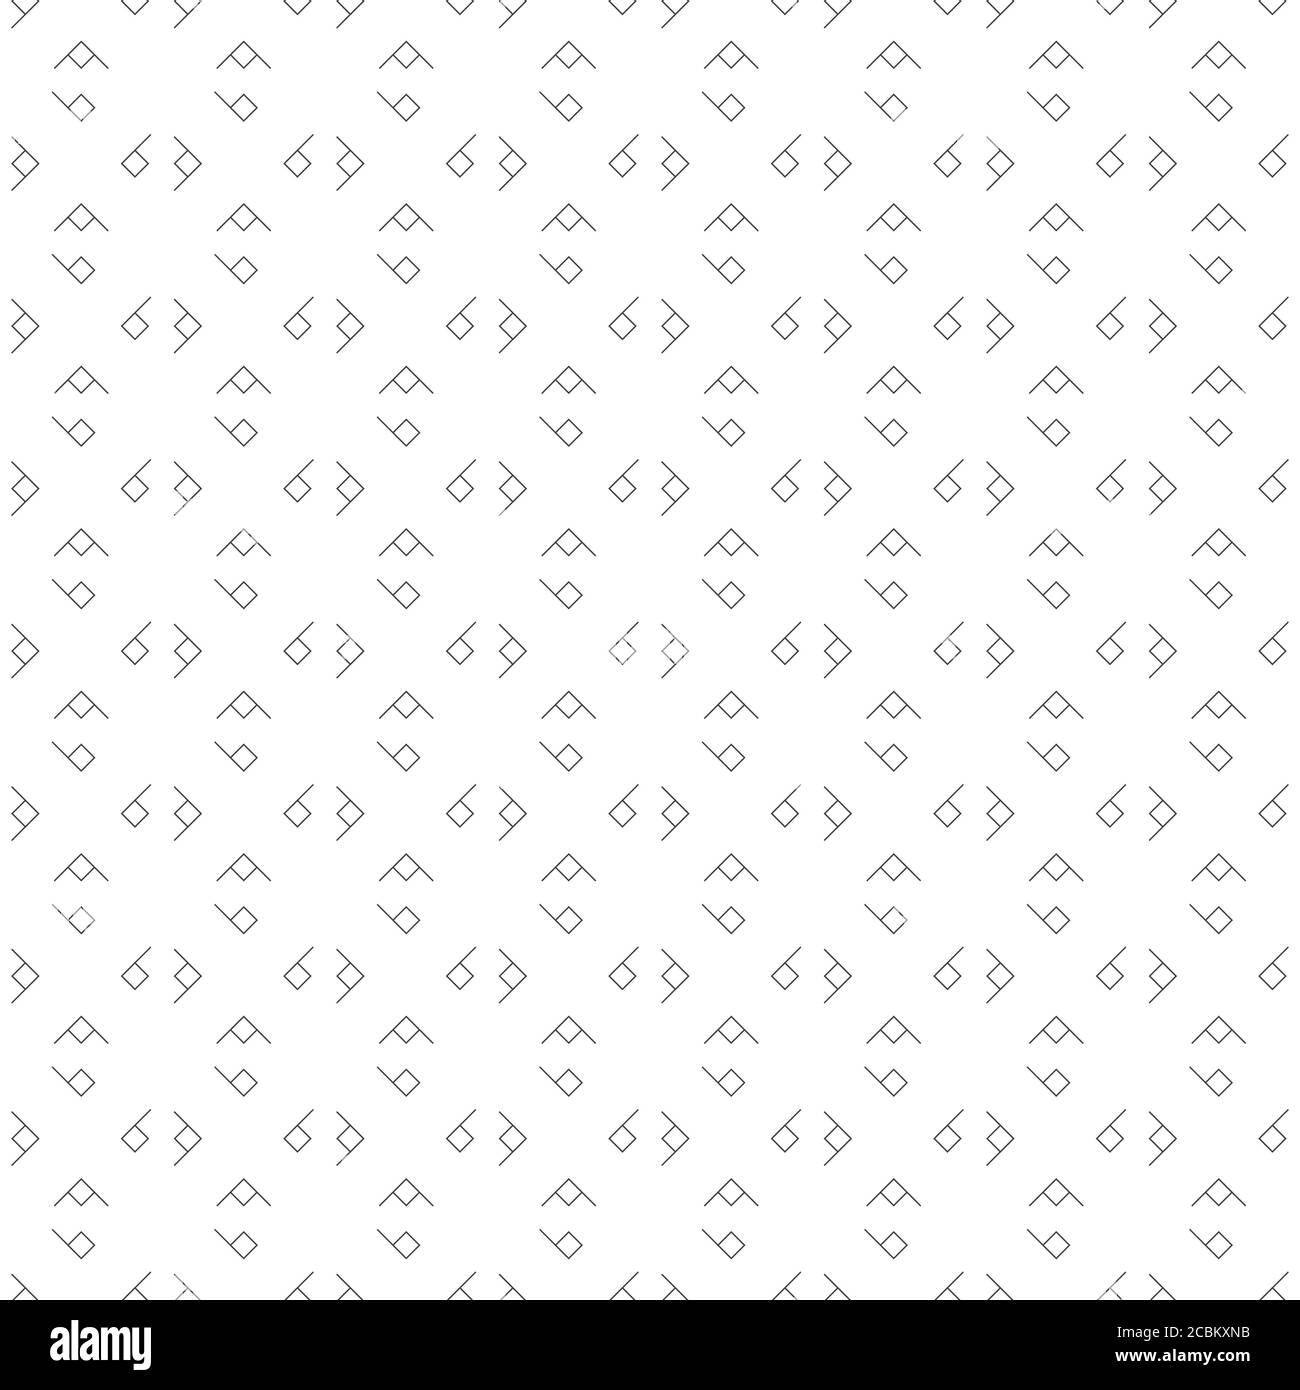 Vector seamless pattern. Minimalist simple geometrical texture. Repeating rhombuses, corners. Surface for wrapping paper, shirts, cloths. Minimal mode Stock Vector